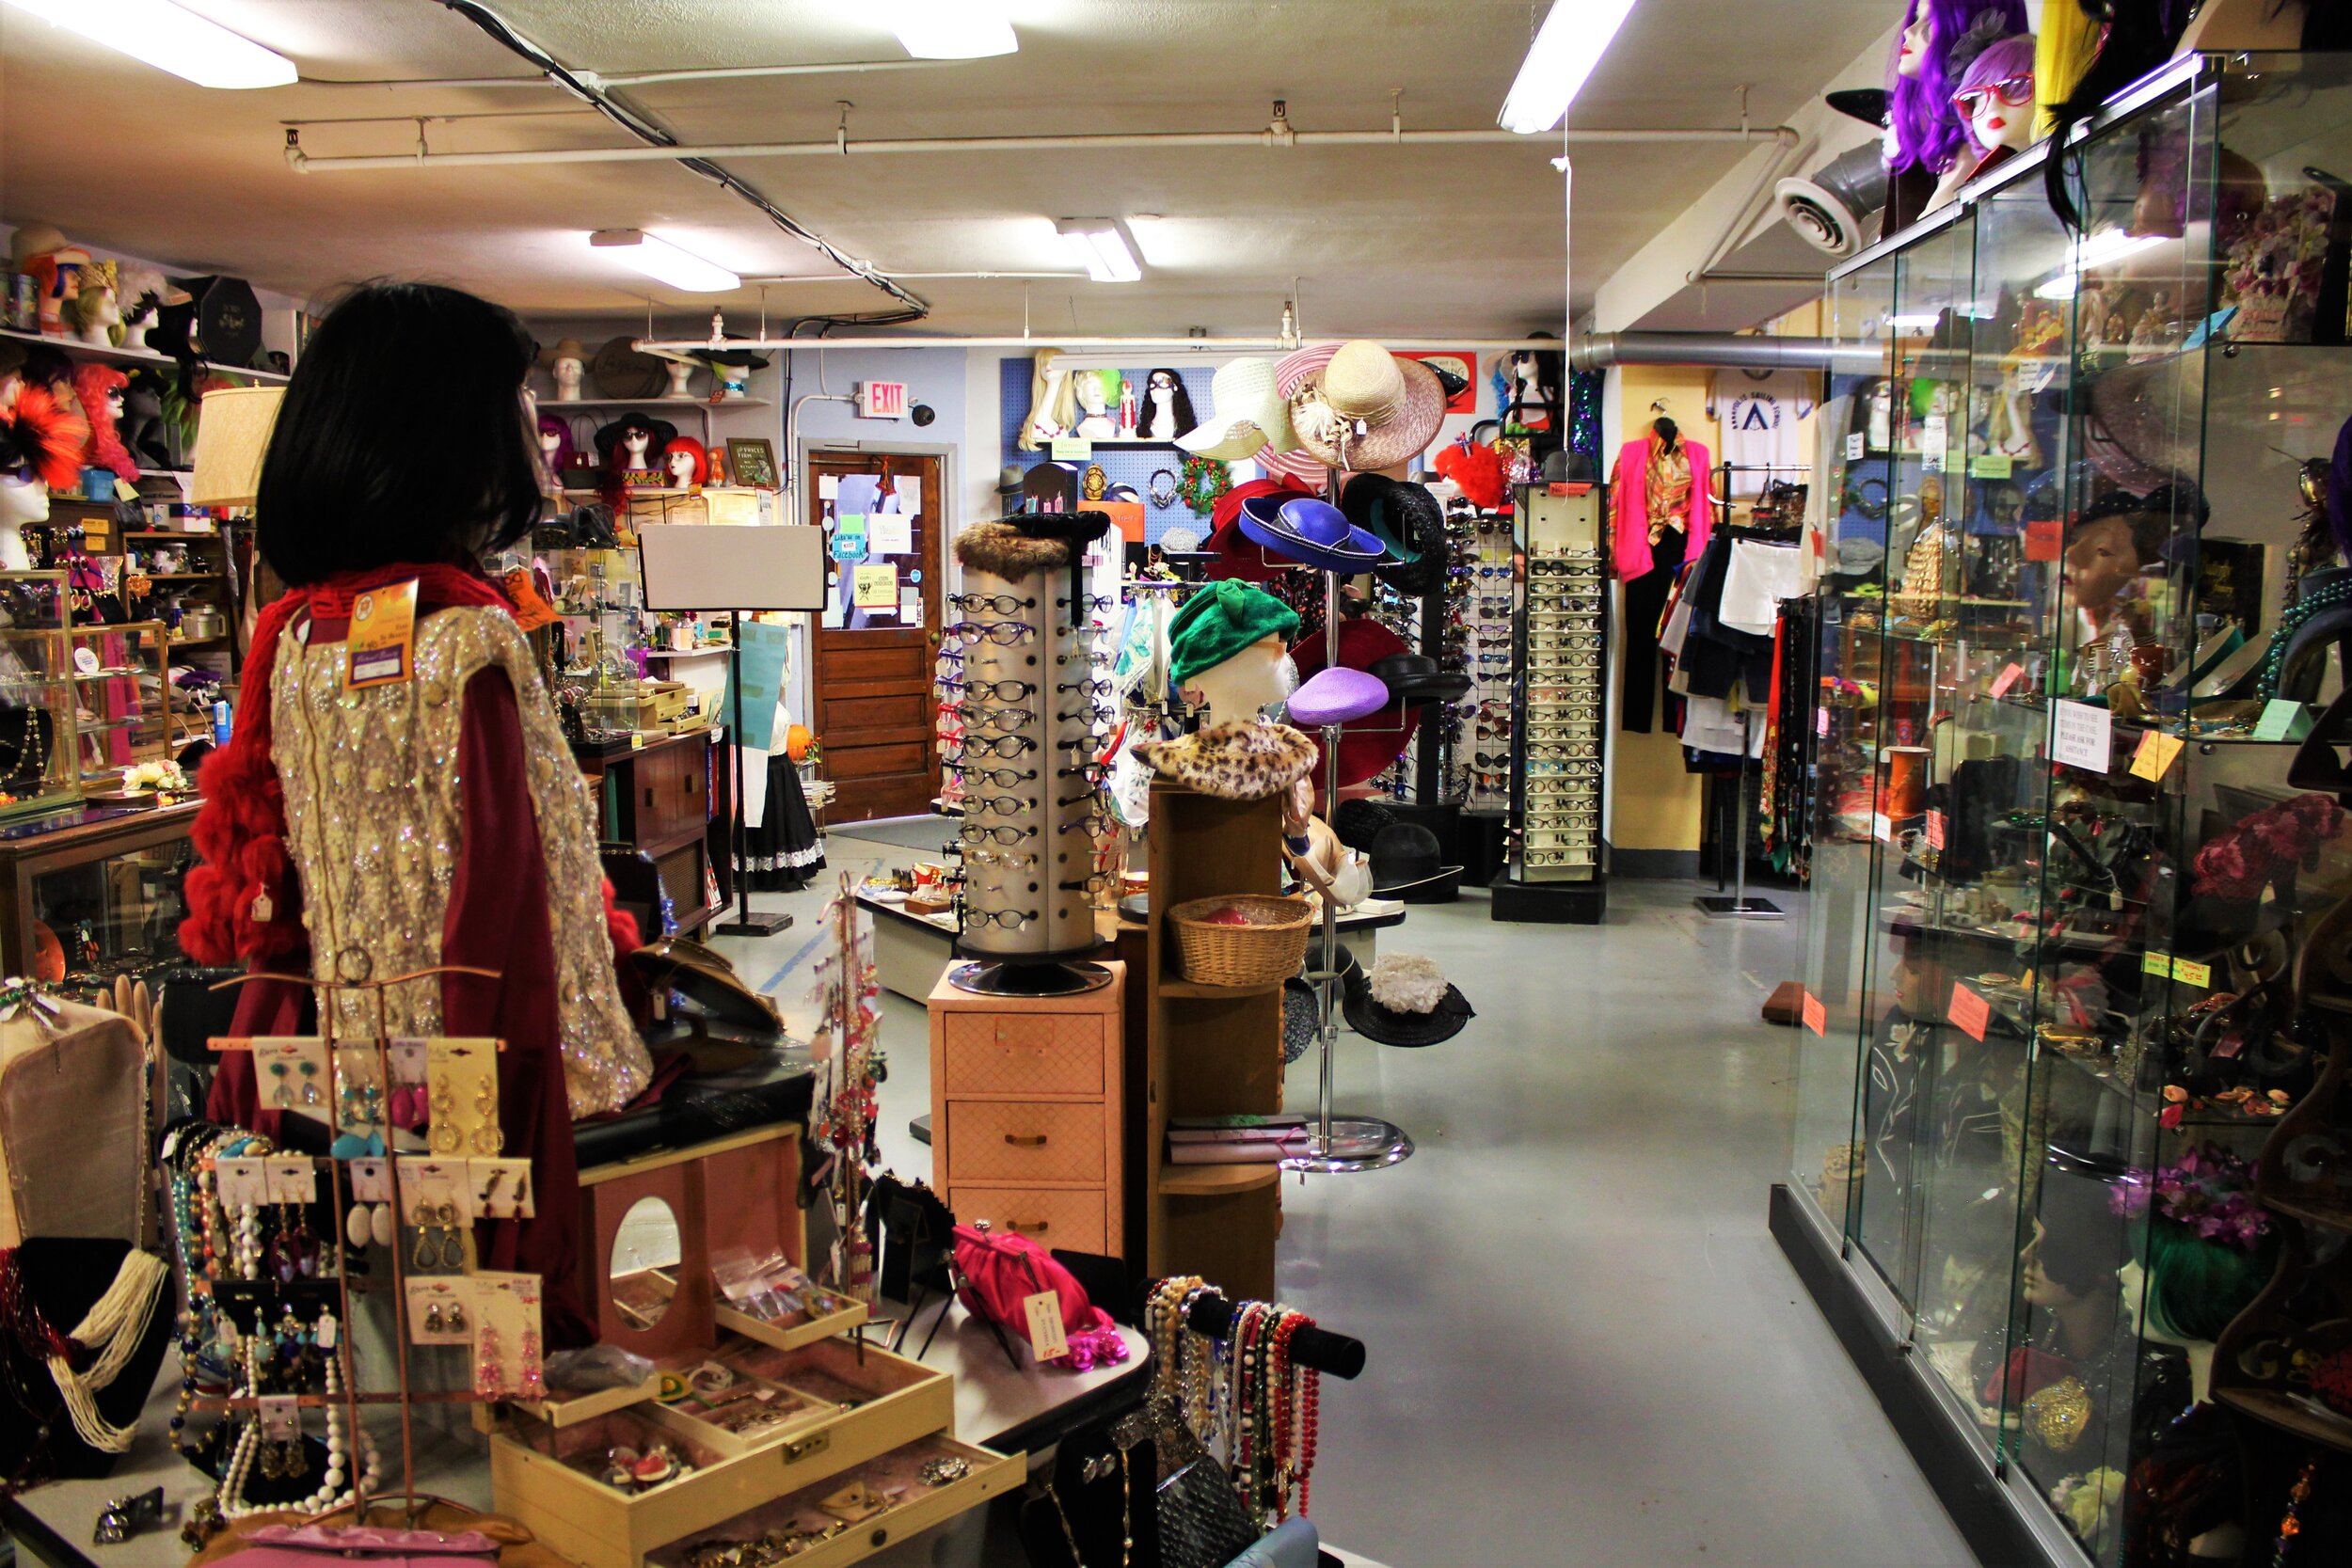 Best Vintage Stores NYC Offers For Retro Shoppers